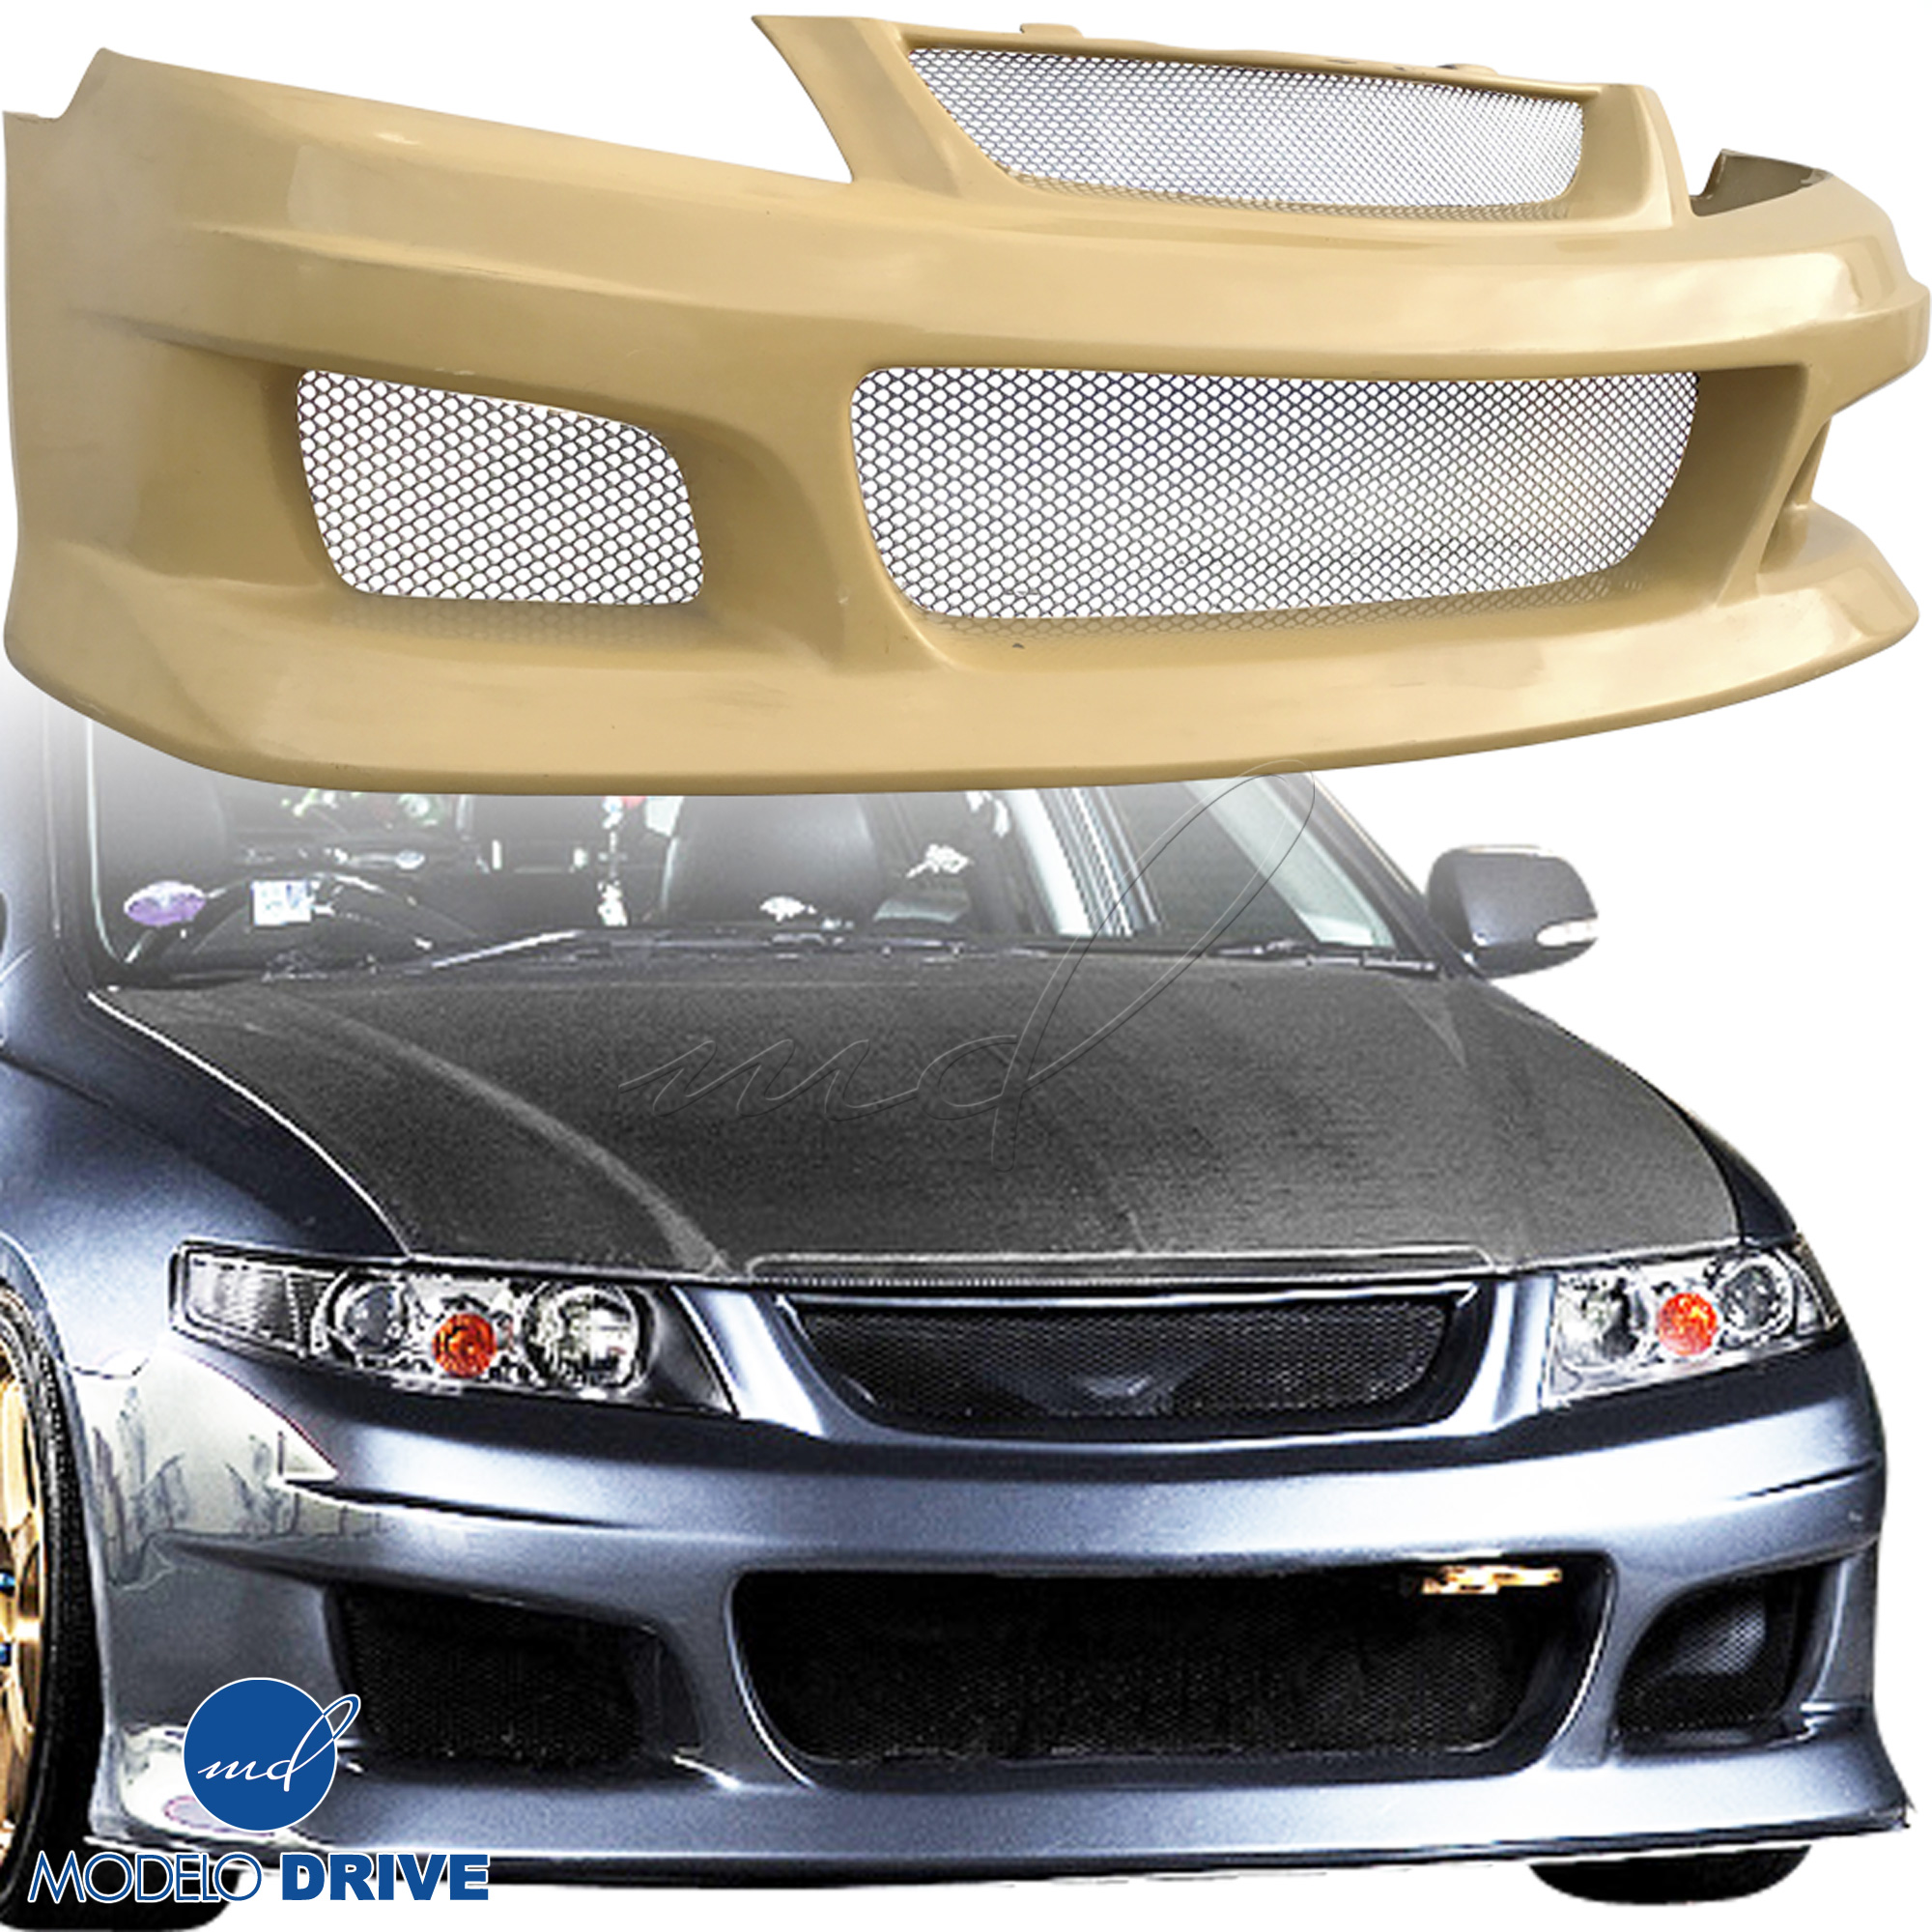 ModeloDrive FRP PHAS Front Bumper > Acura TSX CL9 2004-2008 - Image 13